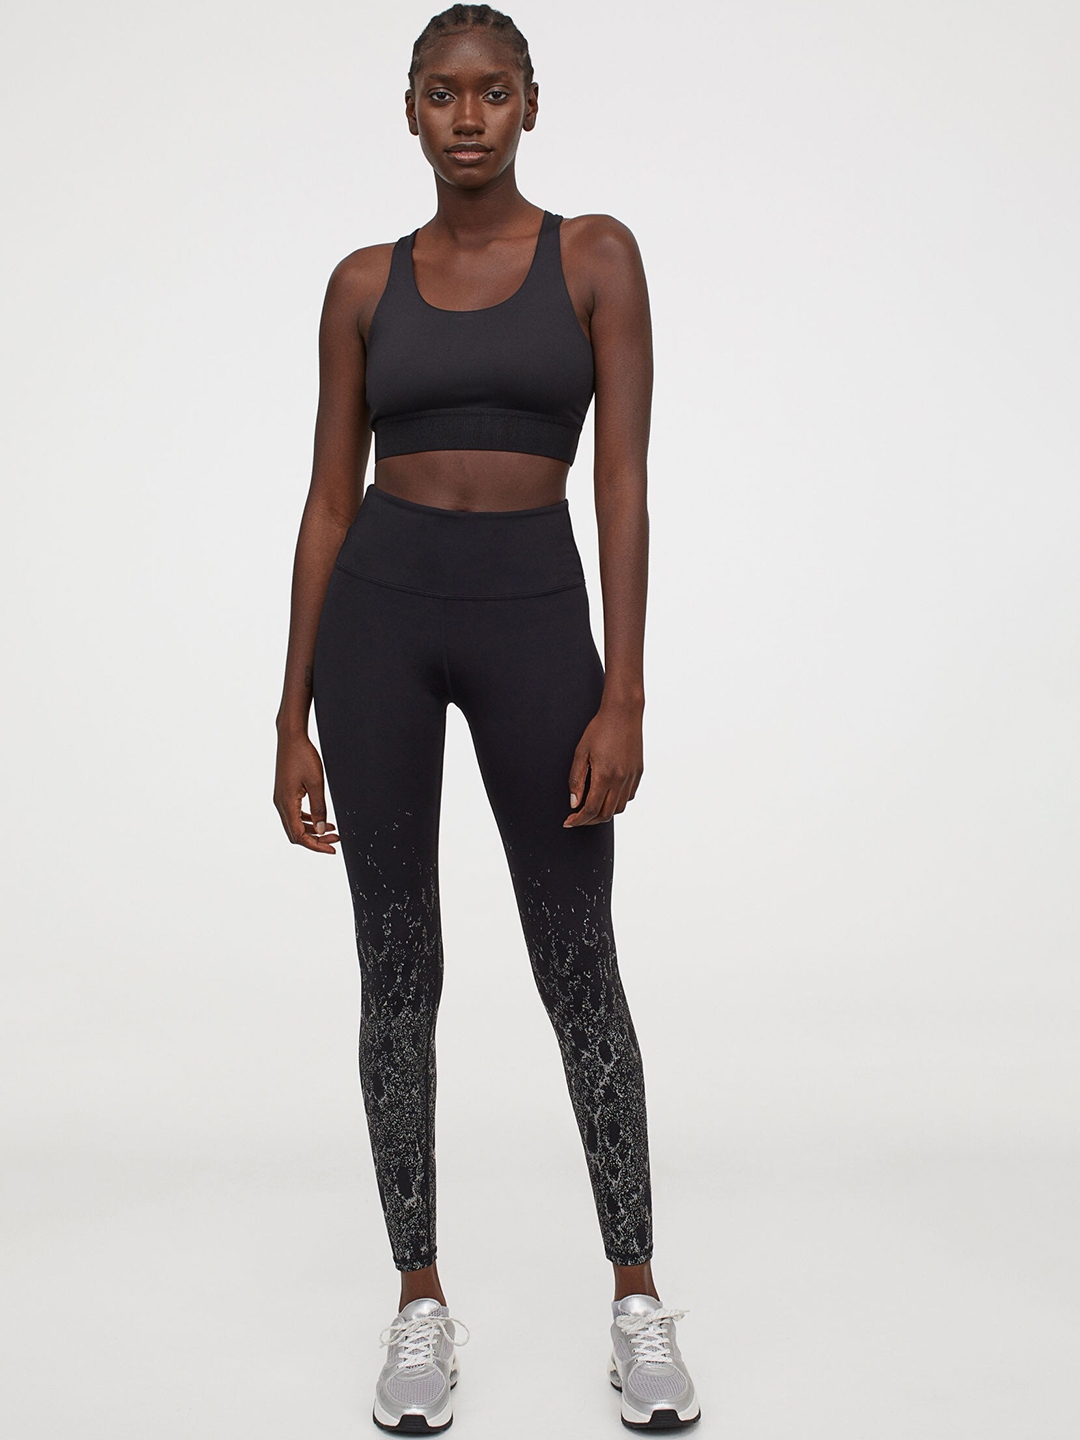 H&m Seamless Sports Leggings Depot  International Society of Precision  Agriculture